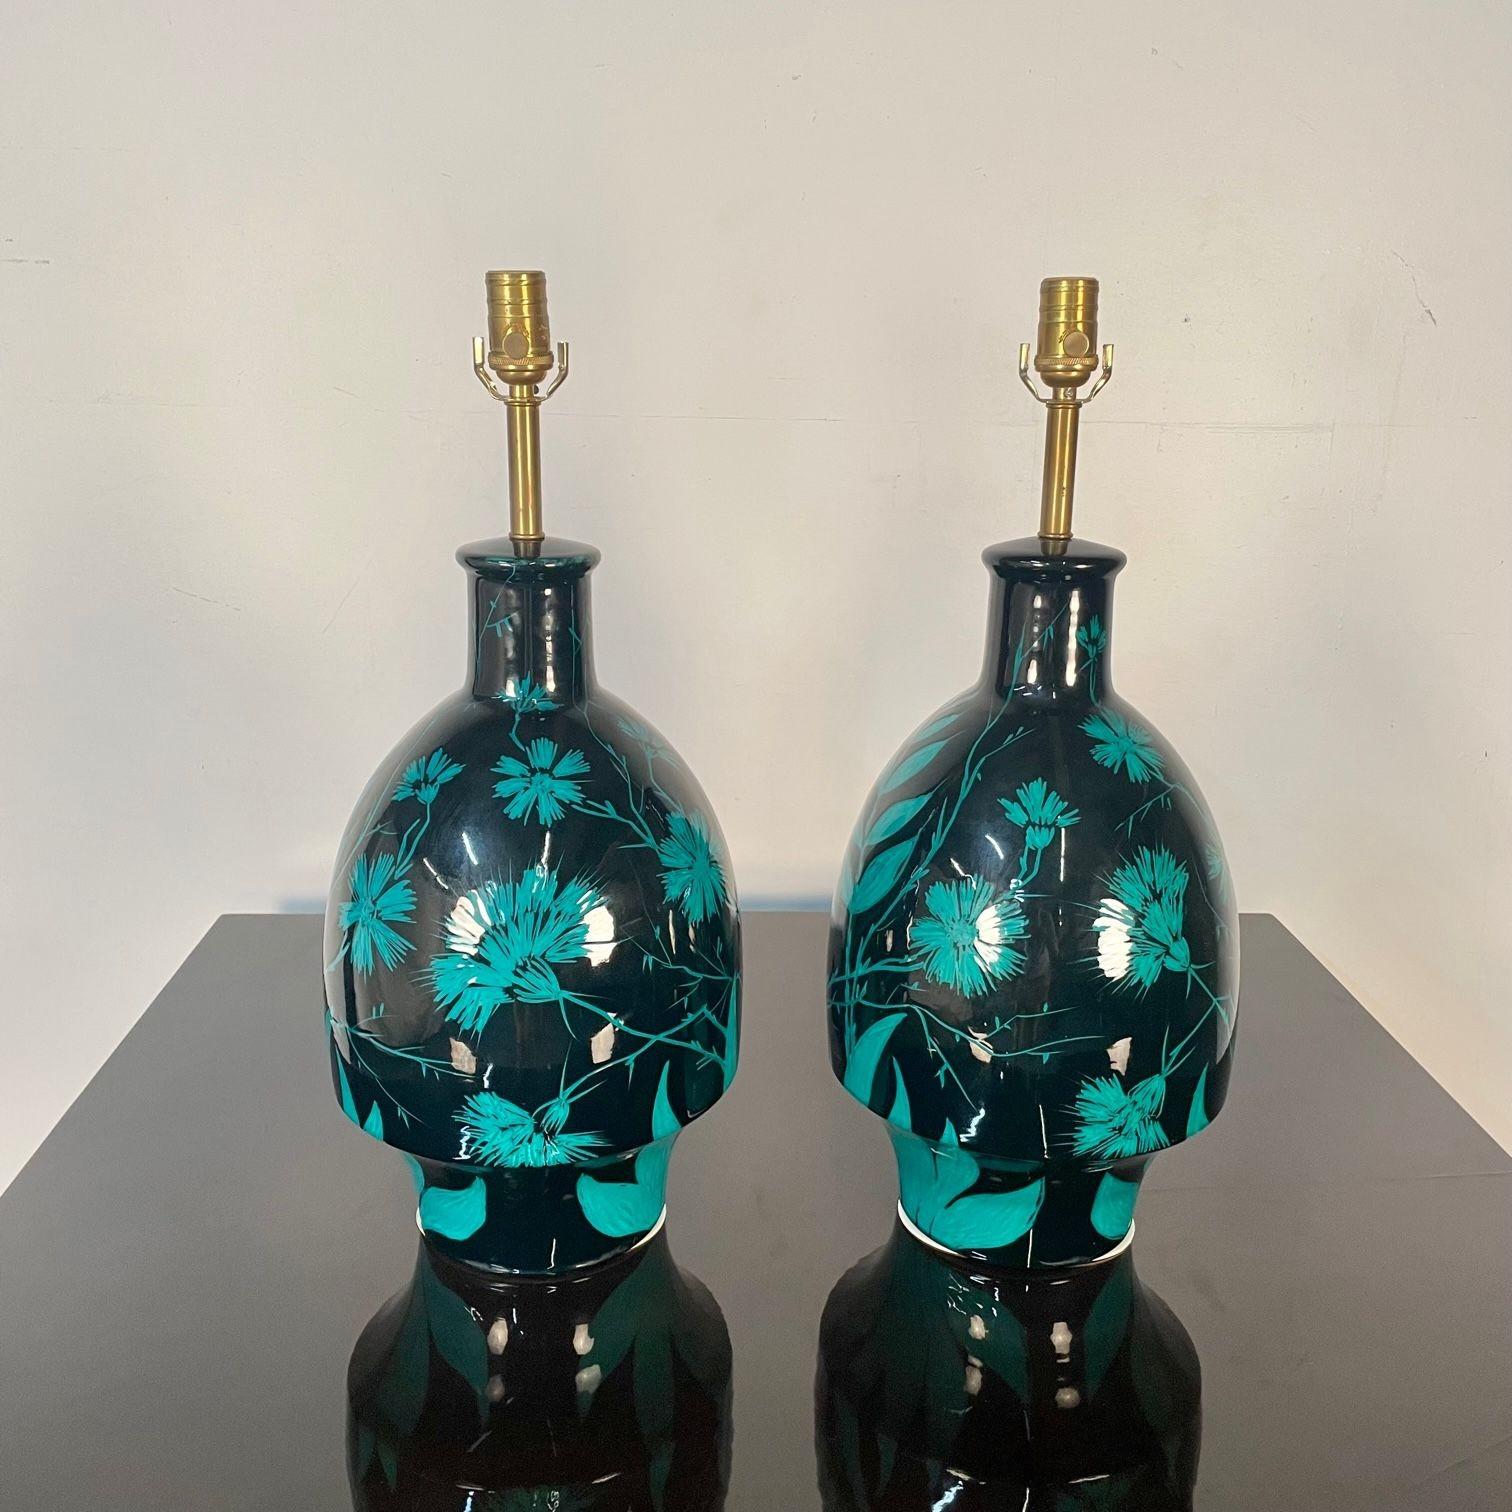 Pair of Mid-Century Modern Ceramic Floral Motif Table Lamps, Green and Blue
 
Blue and green glazed floral table or desk lamps.
 
Ceramic
United States, 2000s
 
24.5 H x 10 Diameter